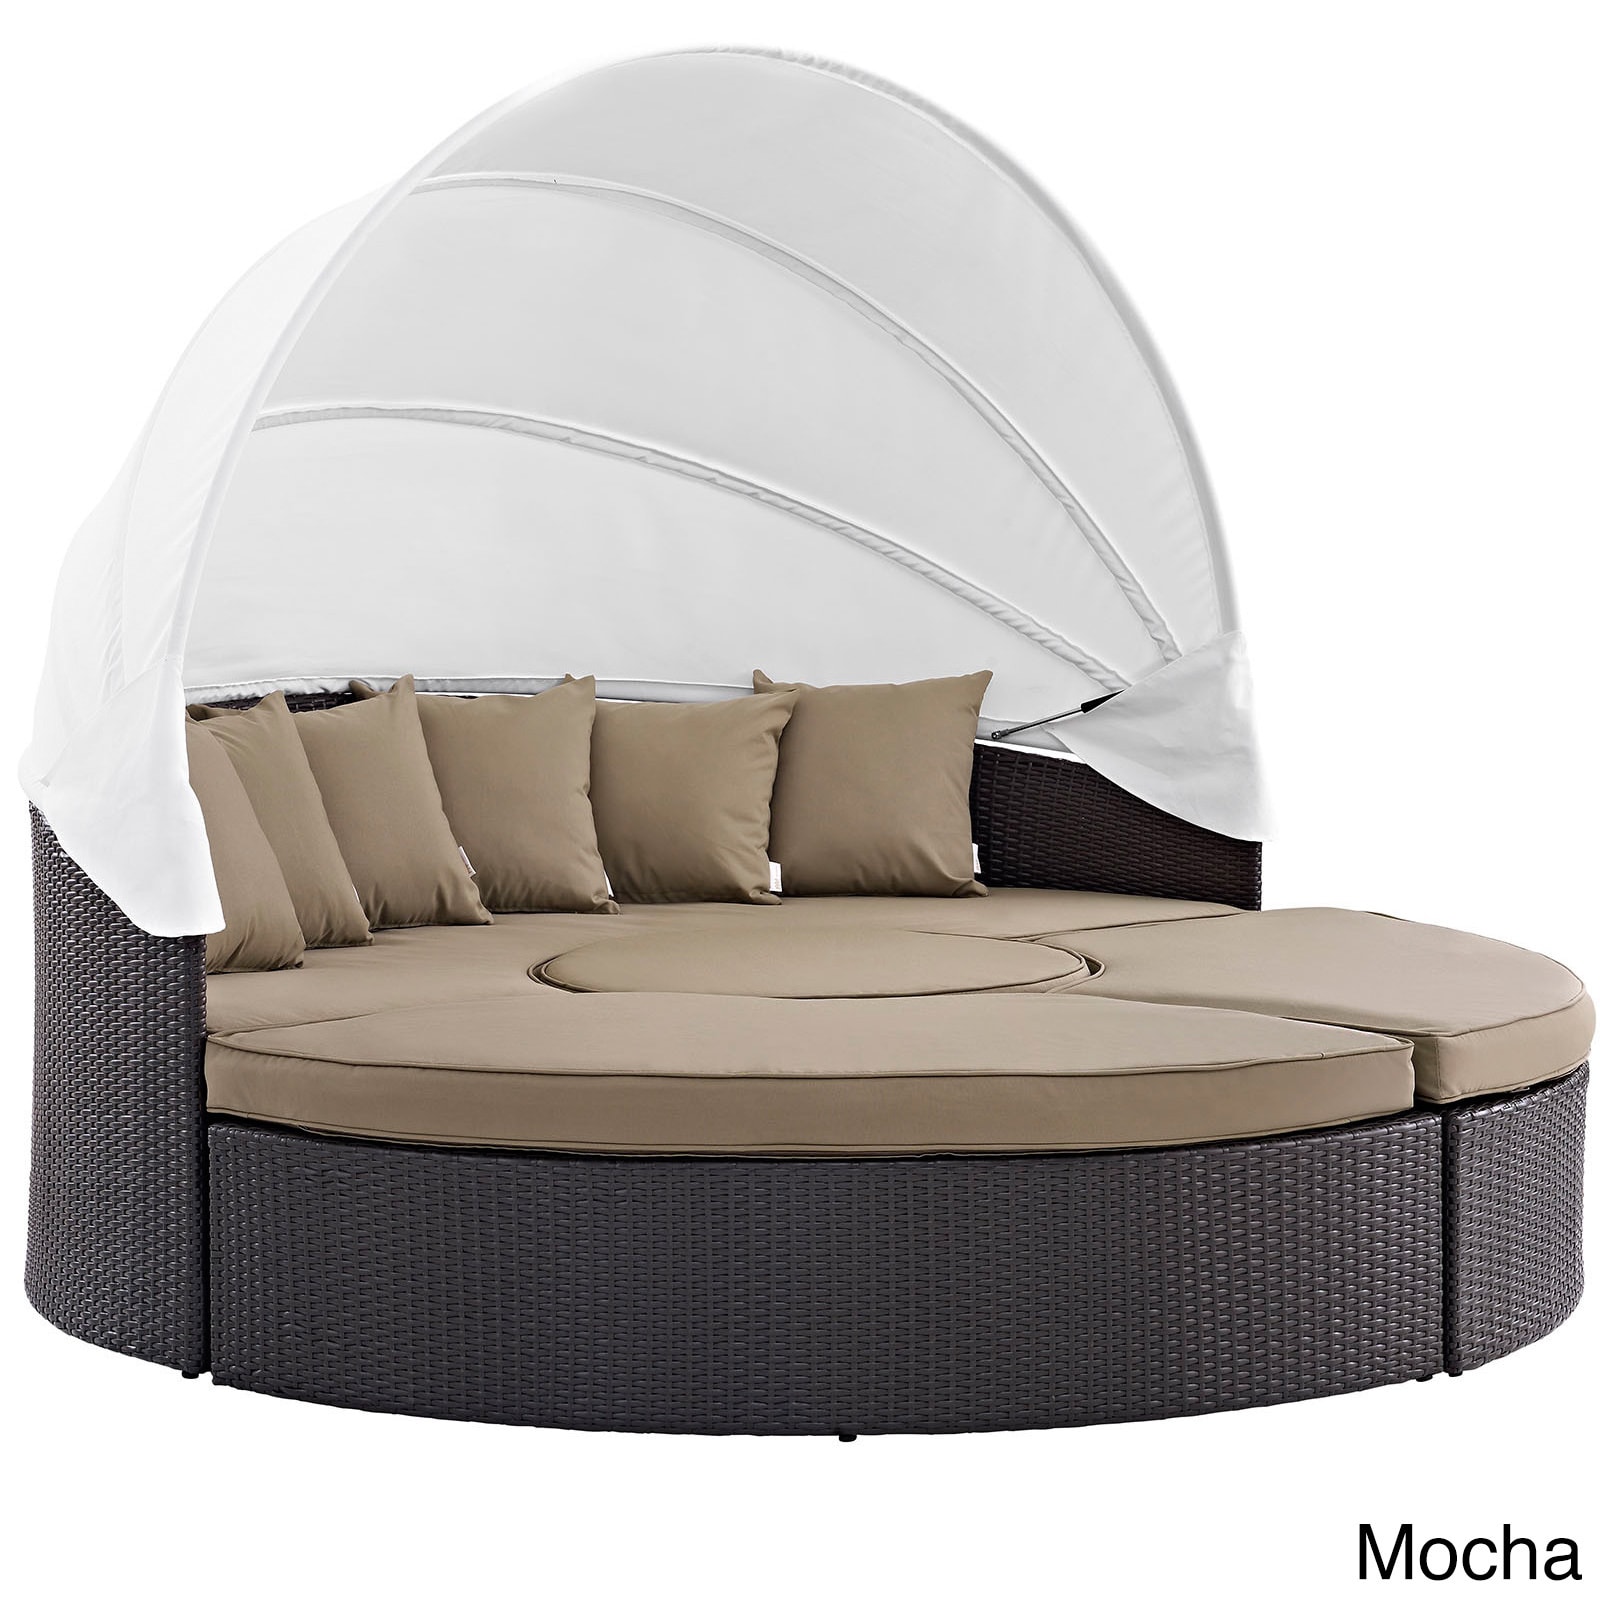 Convene 86-inch Canopy Outdoor Patio Daybed